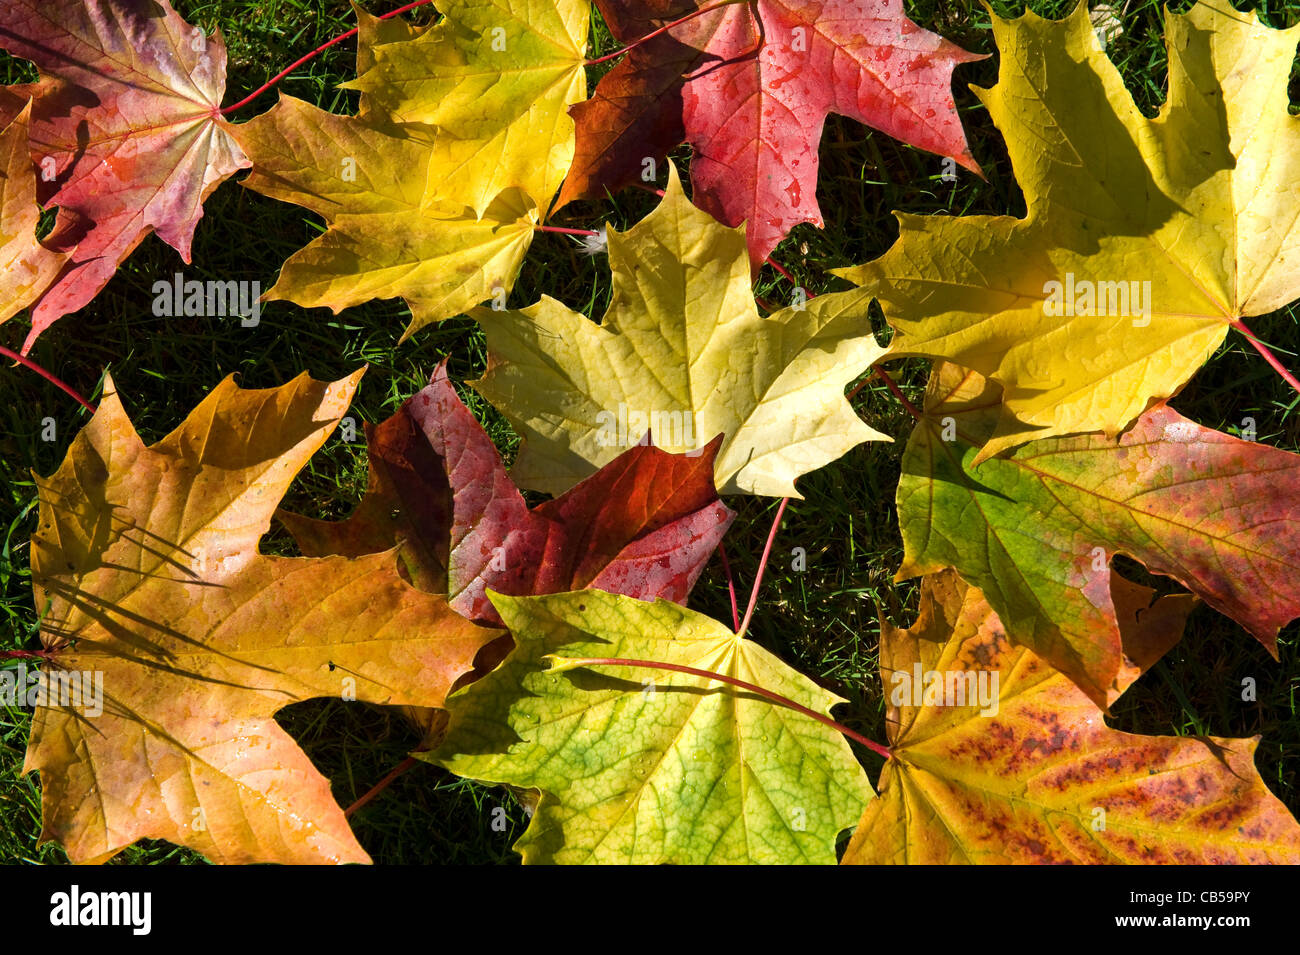 Fallen leaves from a London Plane tree. Stock Photo